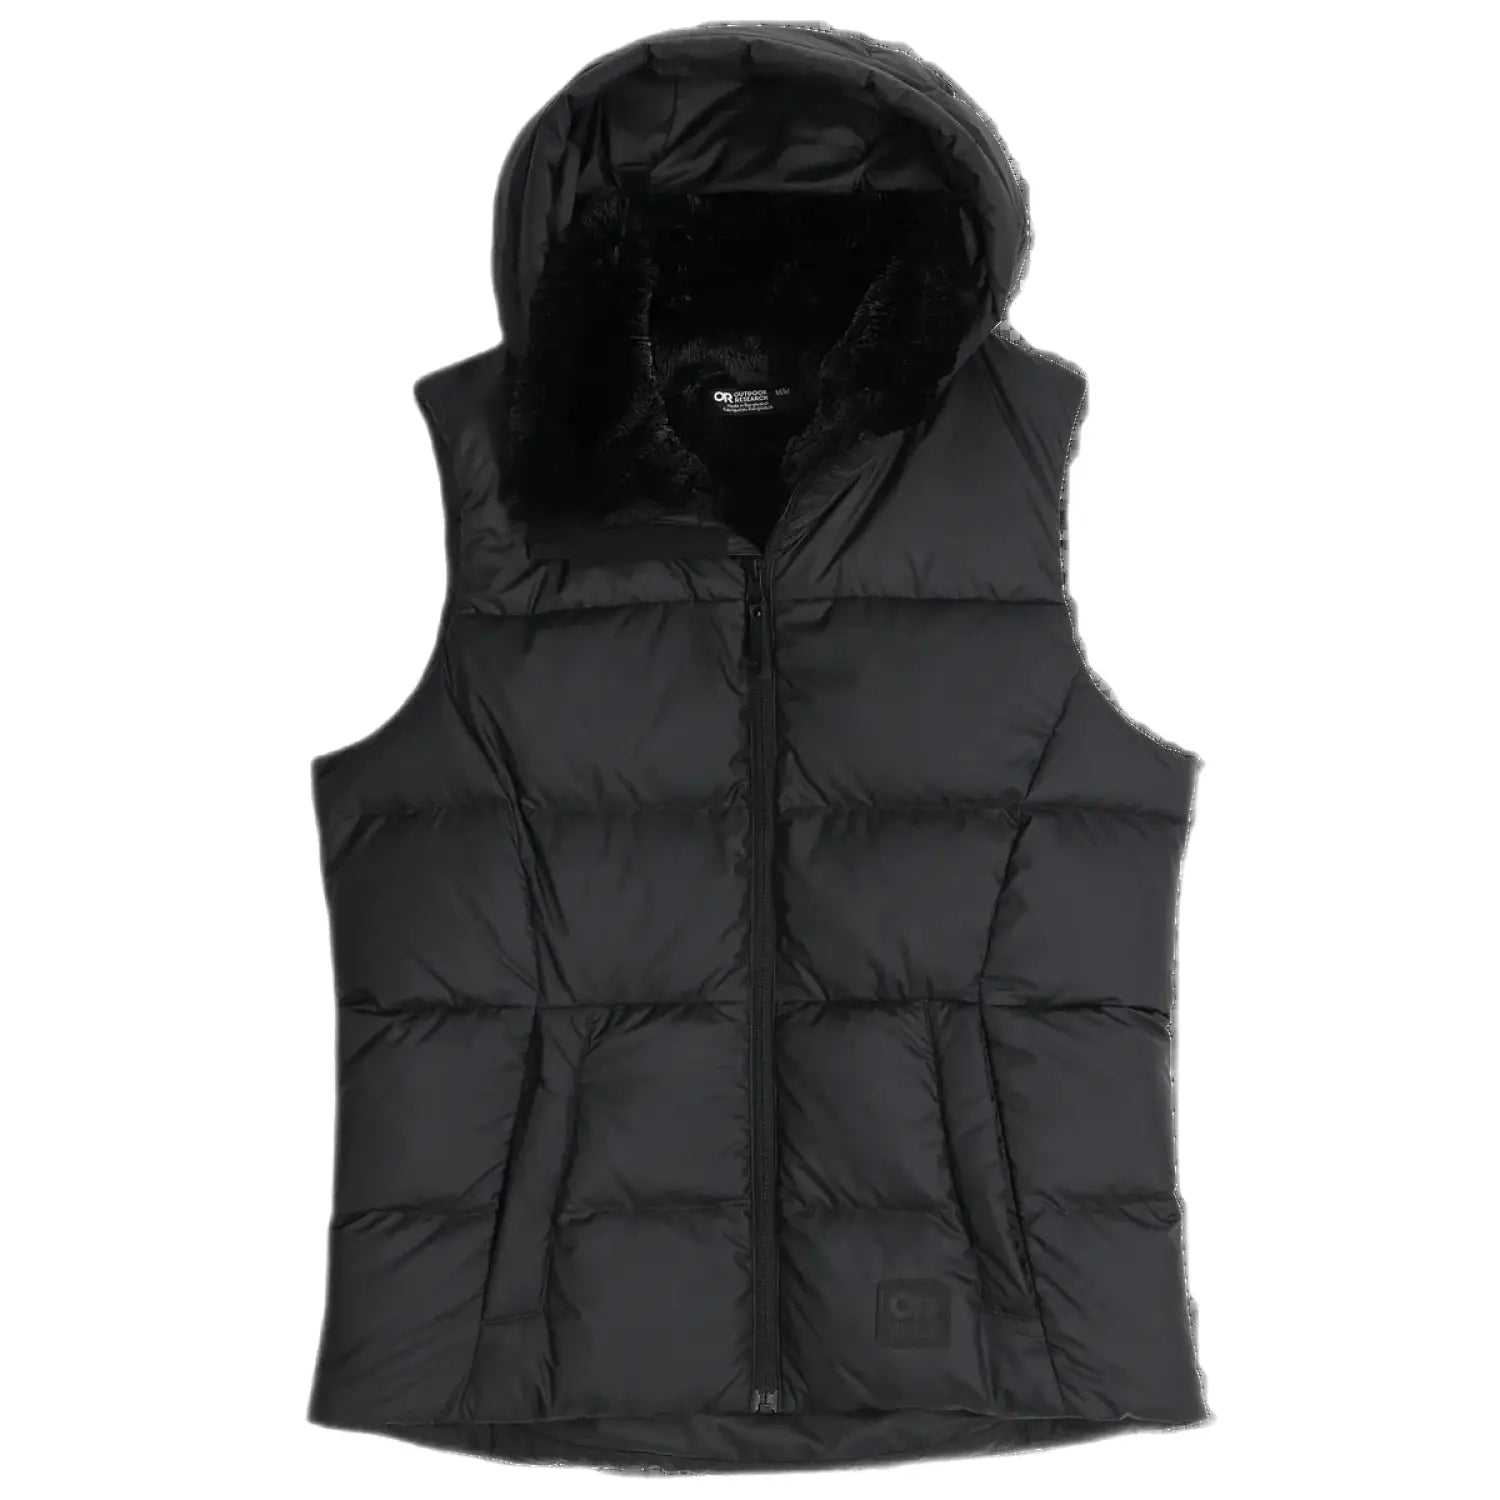 Outdoor Research Women's Coldfront Hooded Down Vest II shown in the Black color option. Flat front view.